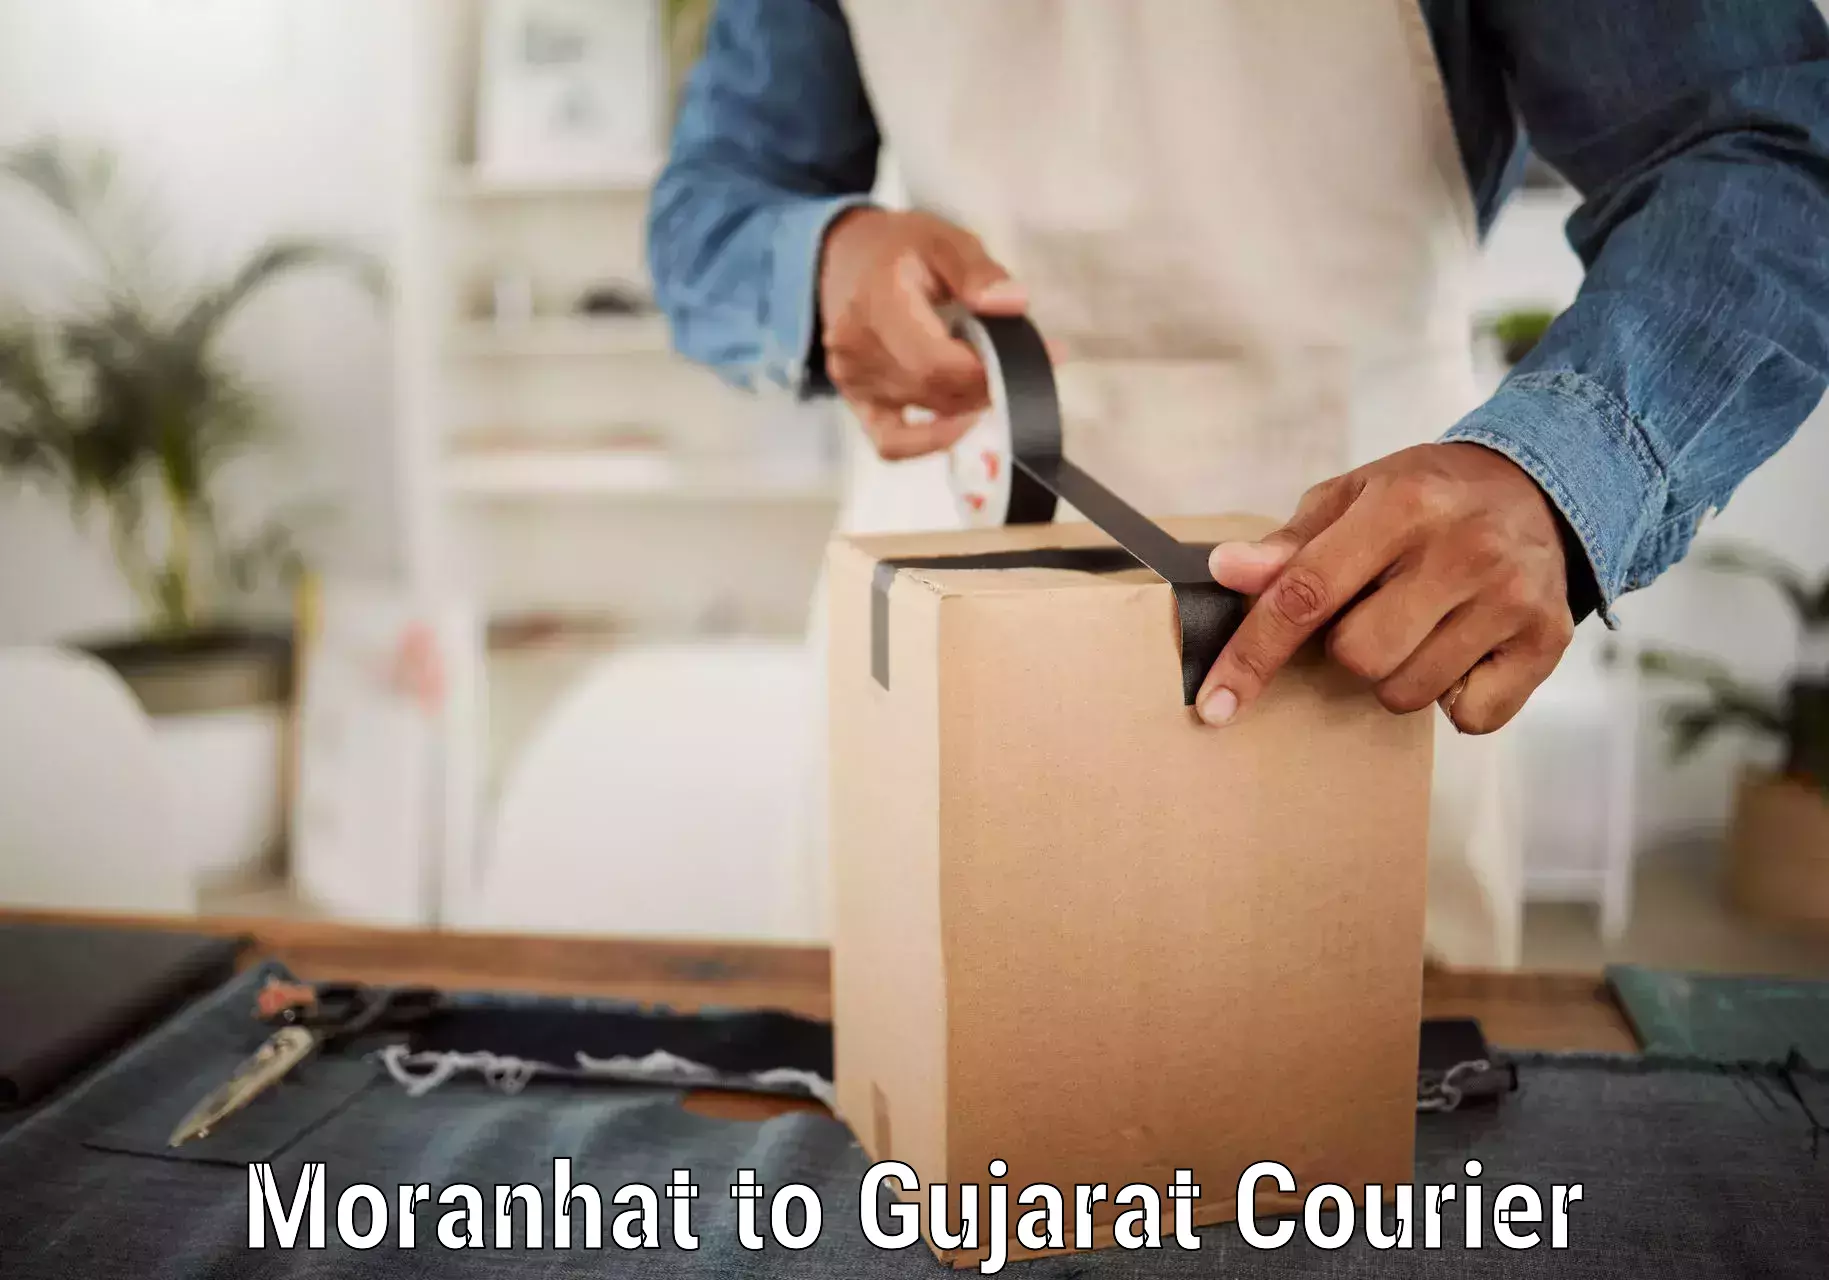 Bulk courier orders Moranhat to Anand